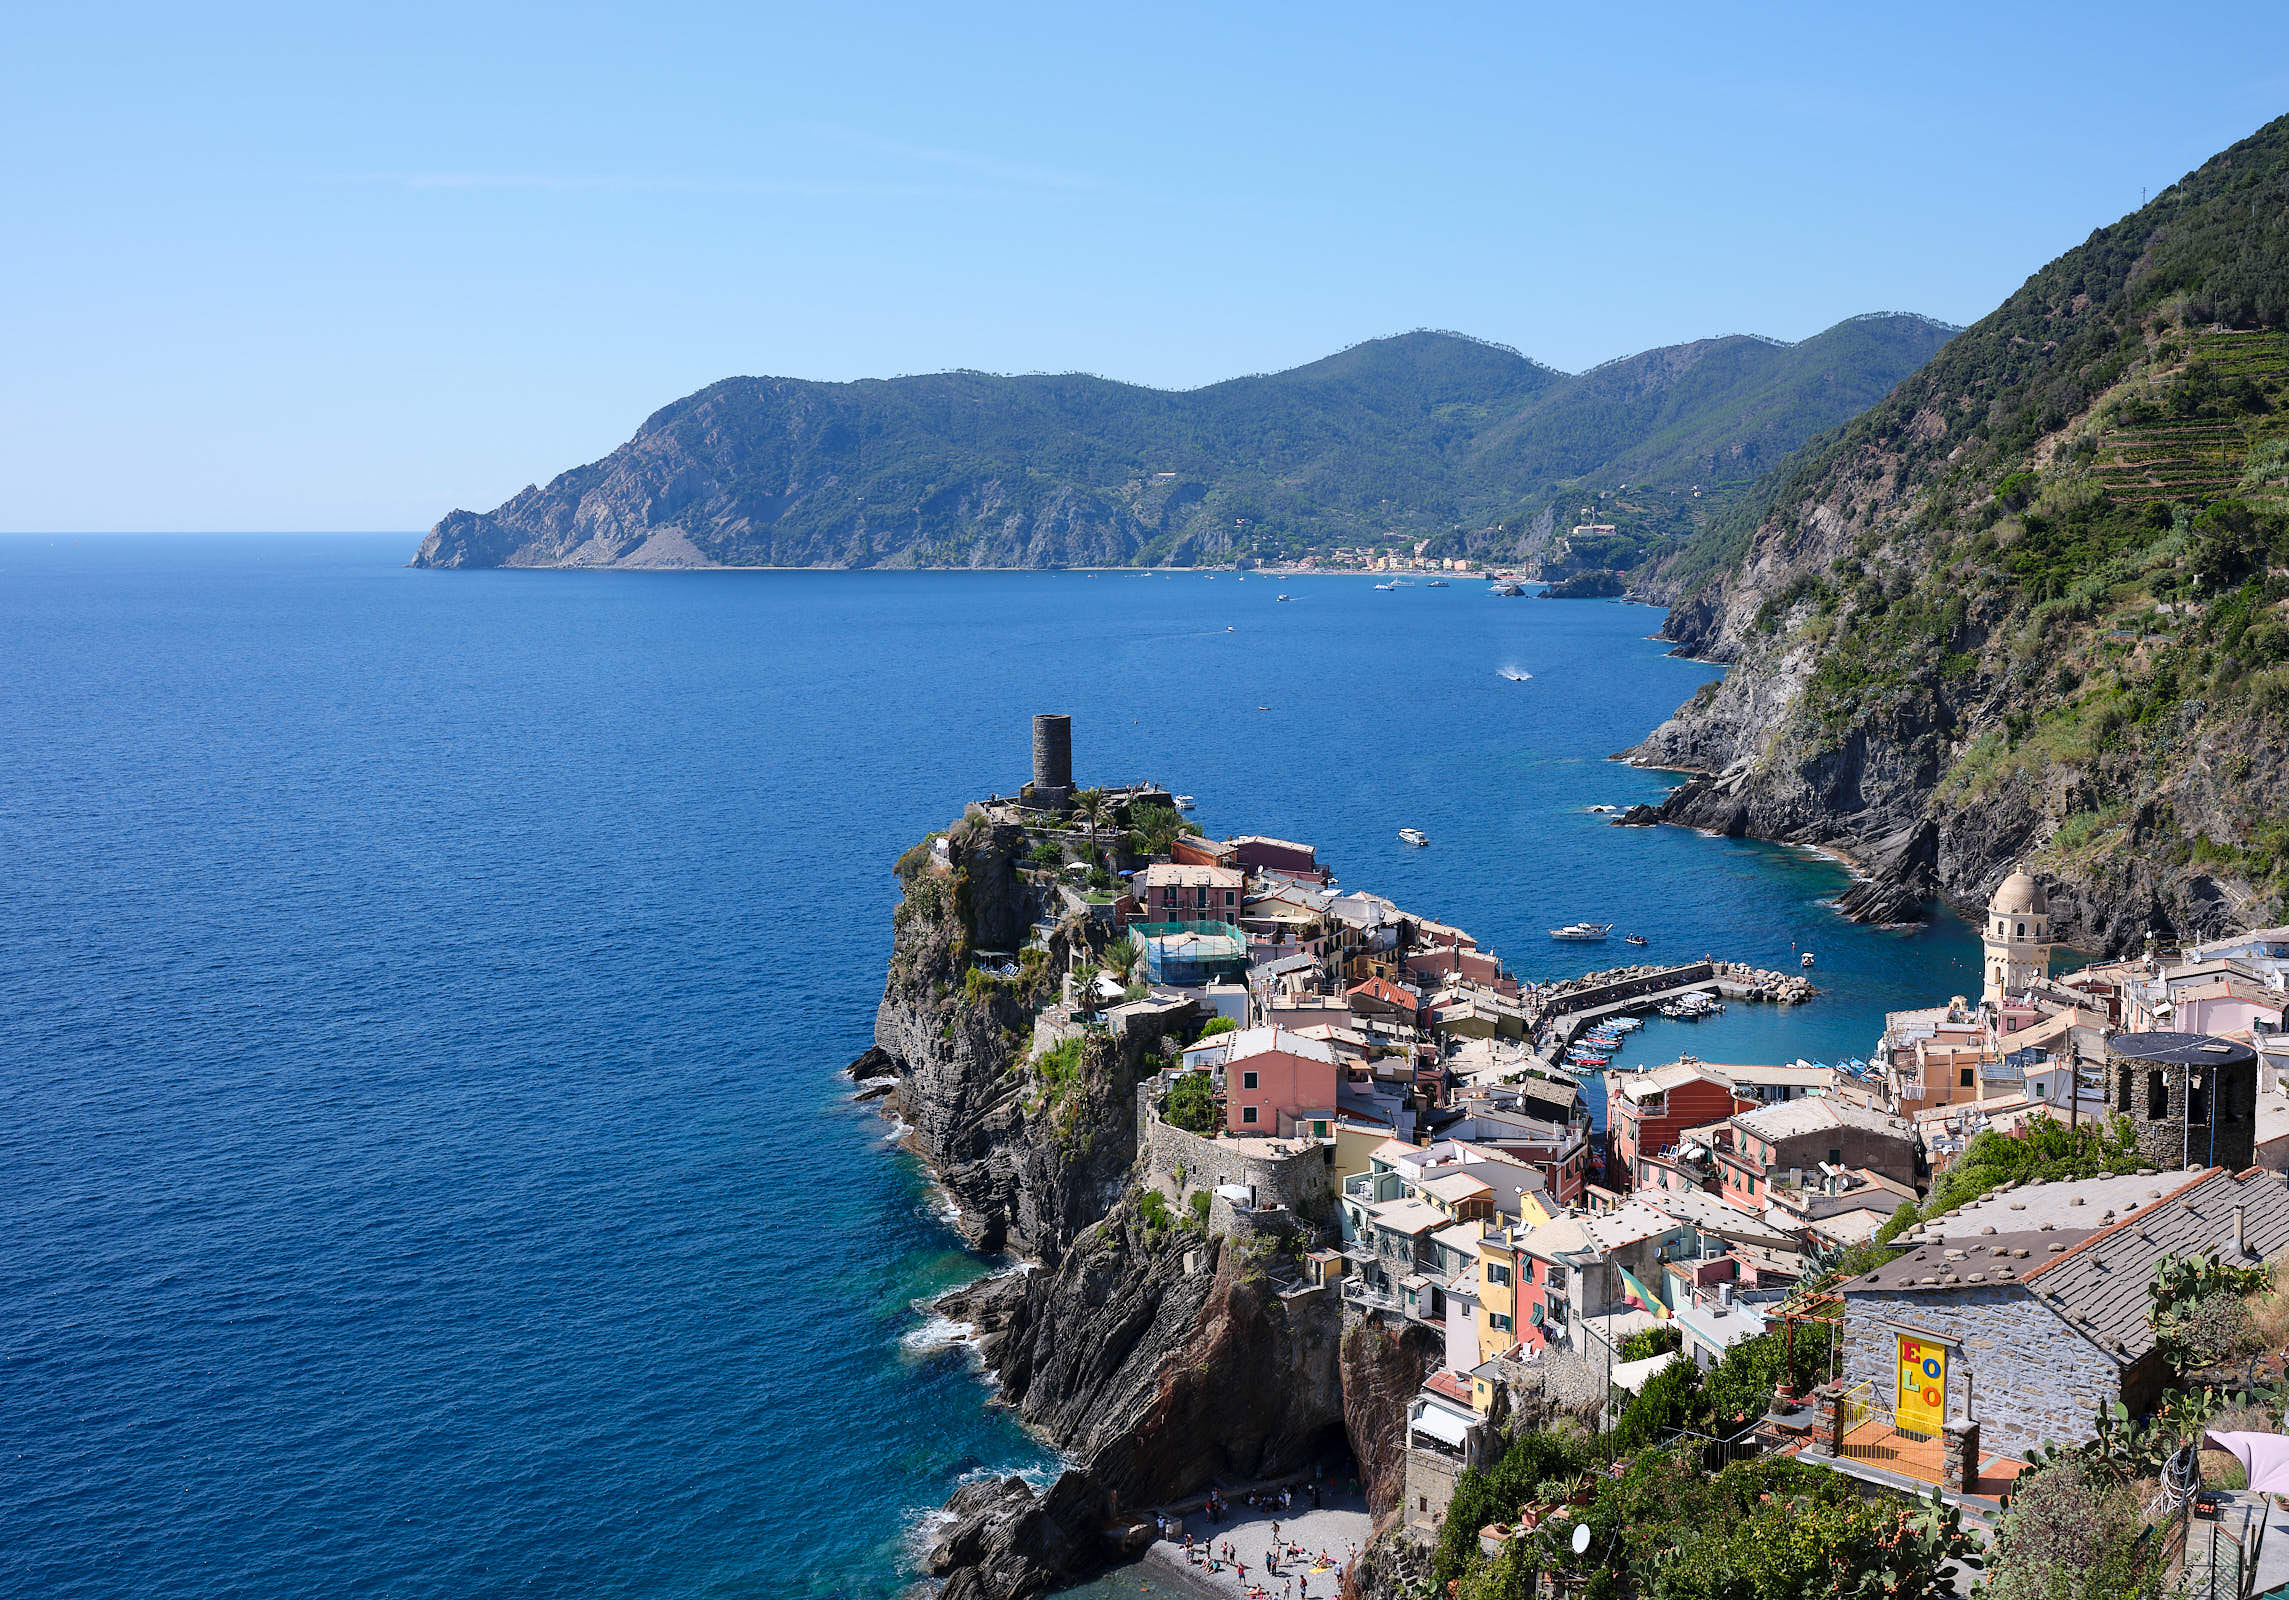 From from the hiking trail, Cinque Terre